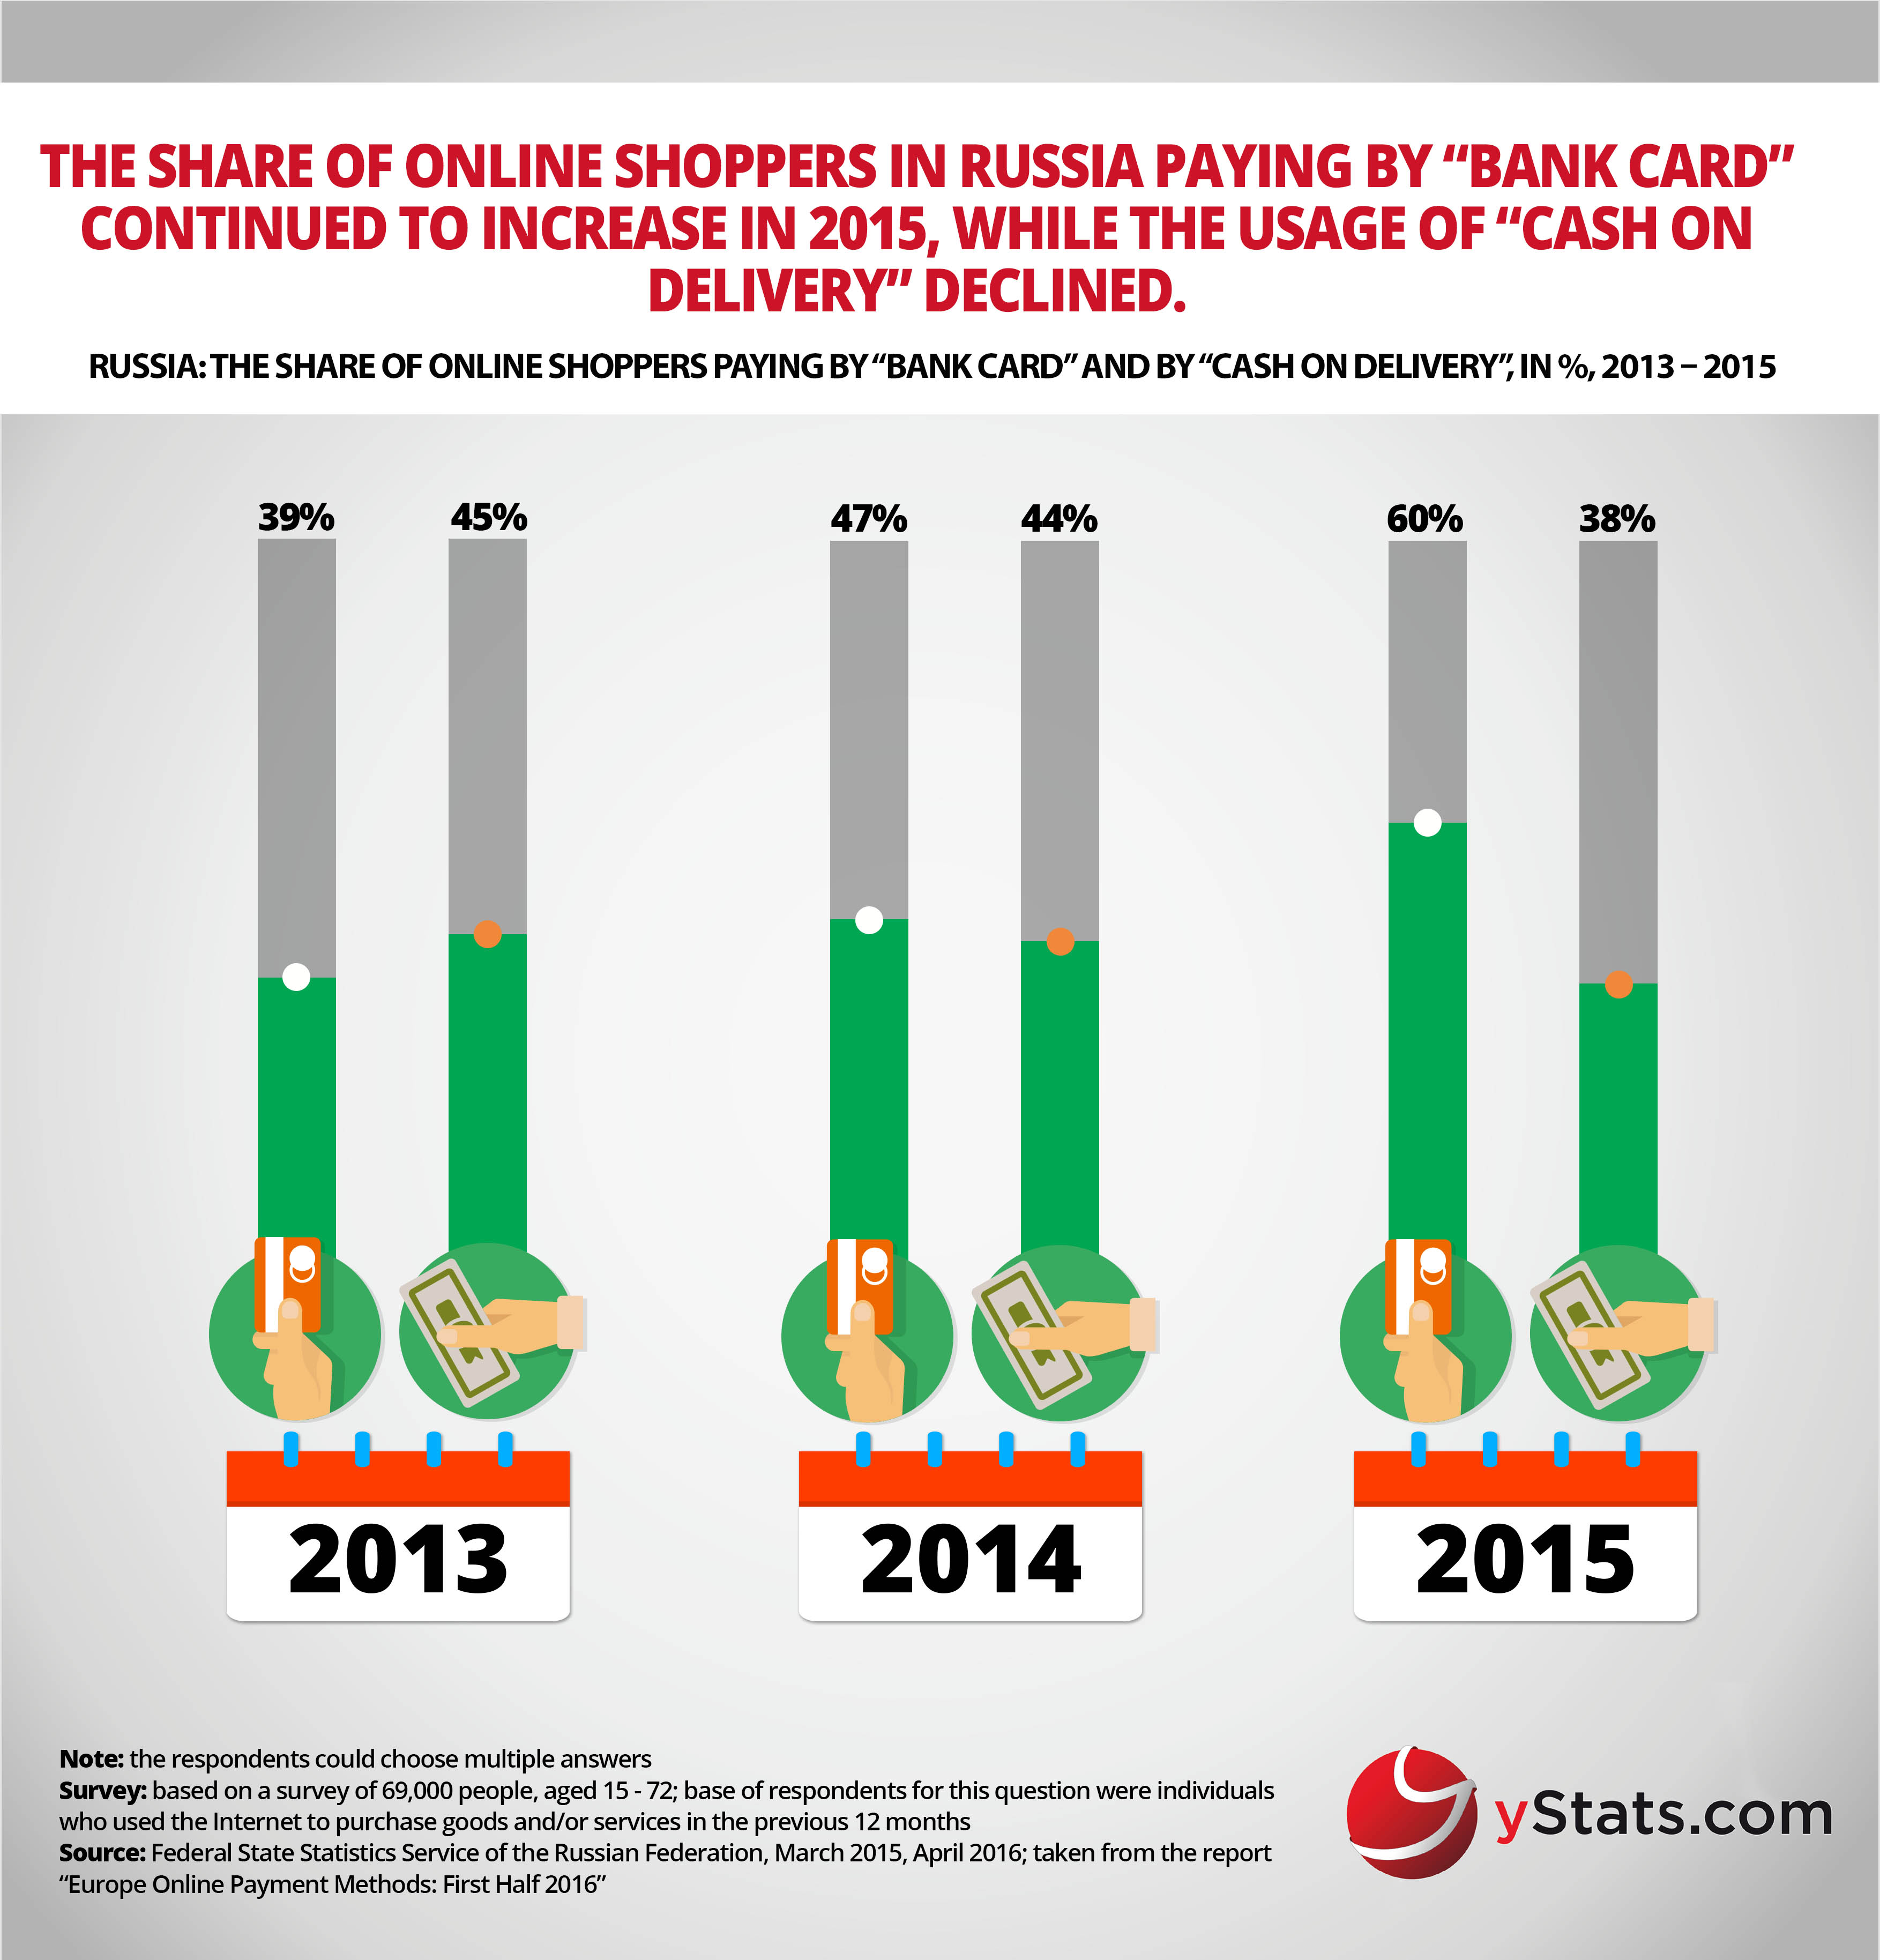 share of online shoppers paying by bank card and cash on delivery